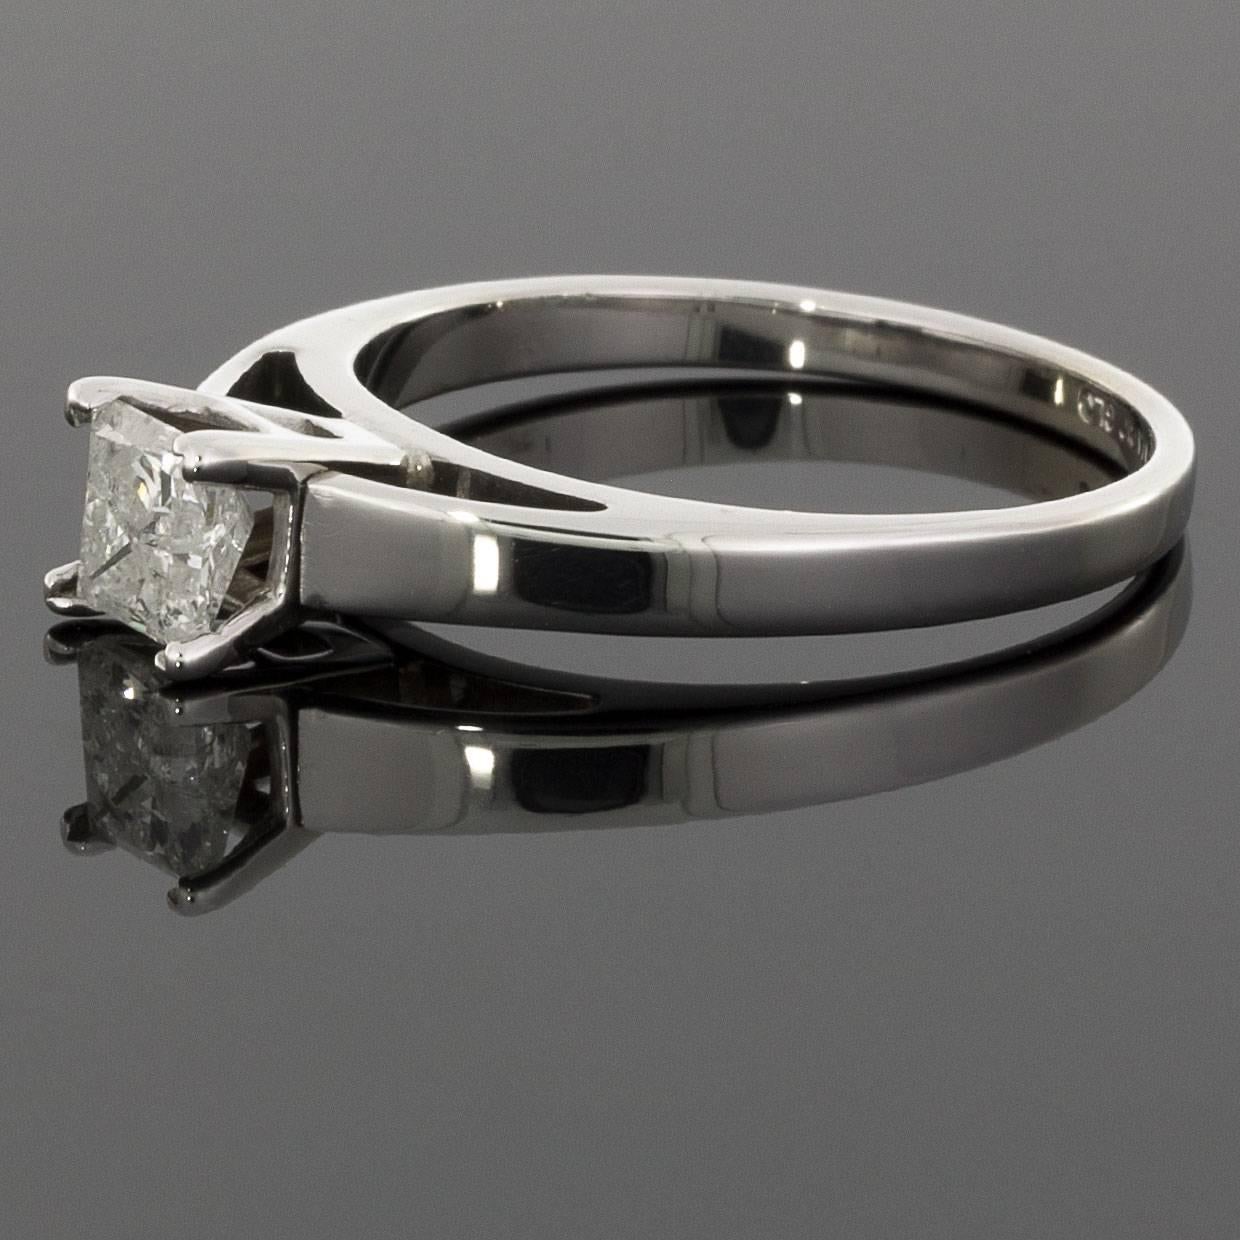 This beautiful diamond engagement ring features a princess or square brilliant cut diamond center. This diamond weighs .52 carat & grades as I/I1 in quality. It is 4-prong set in a 14 karat, white gold solitaire setting. The classic, timeless